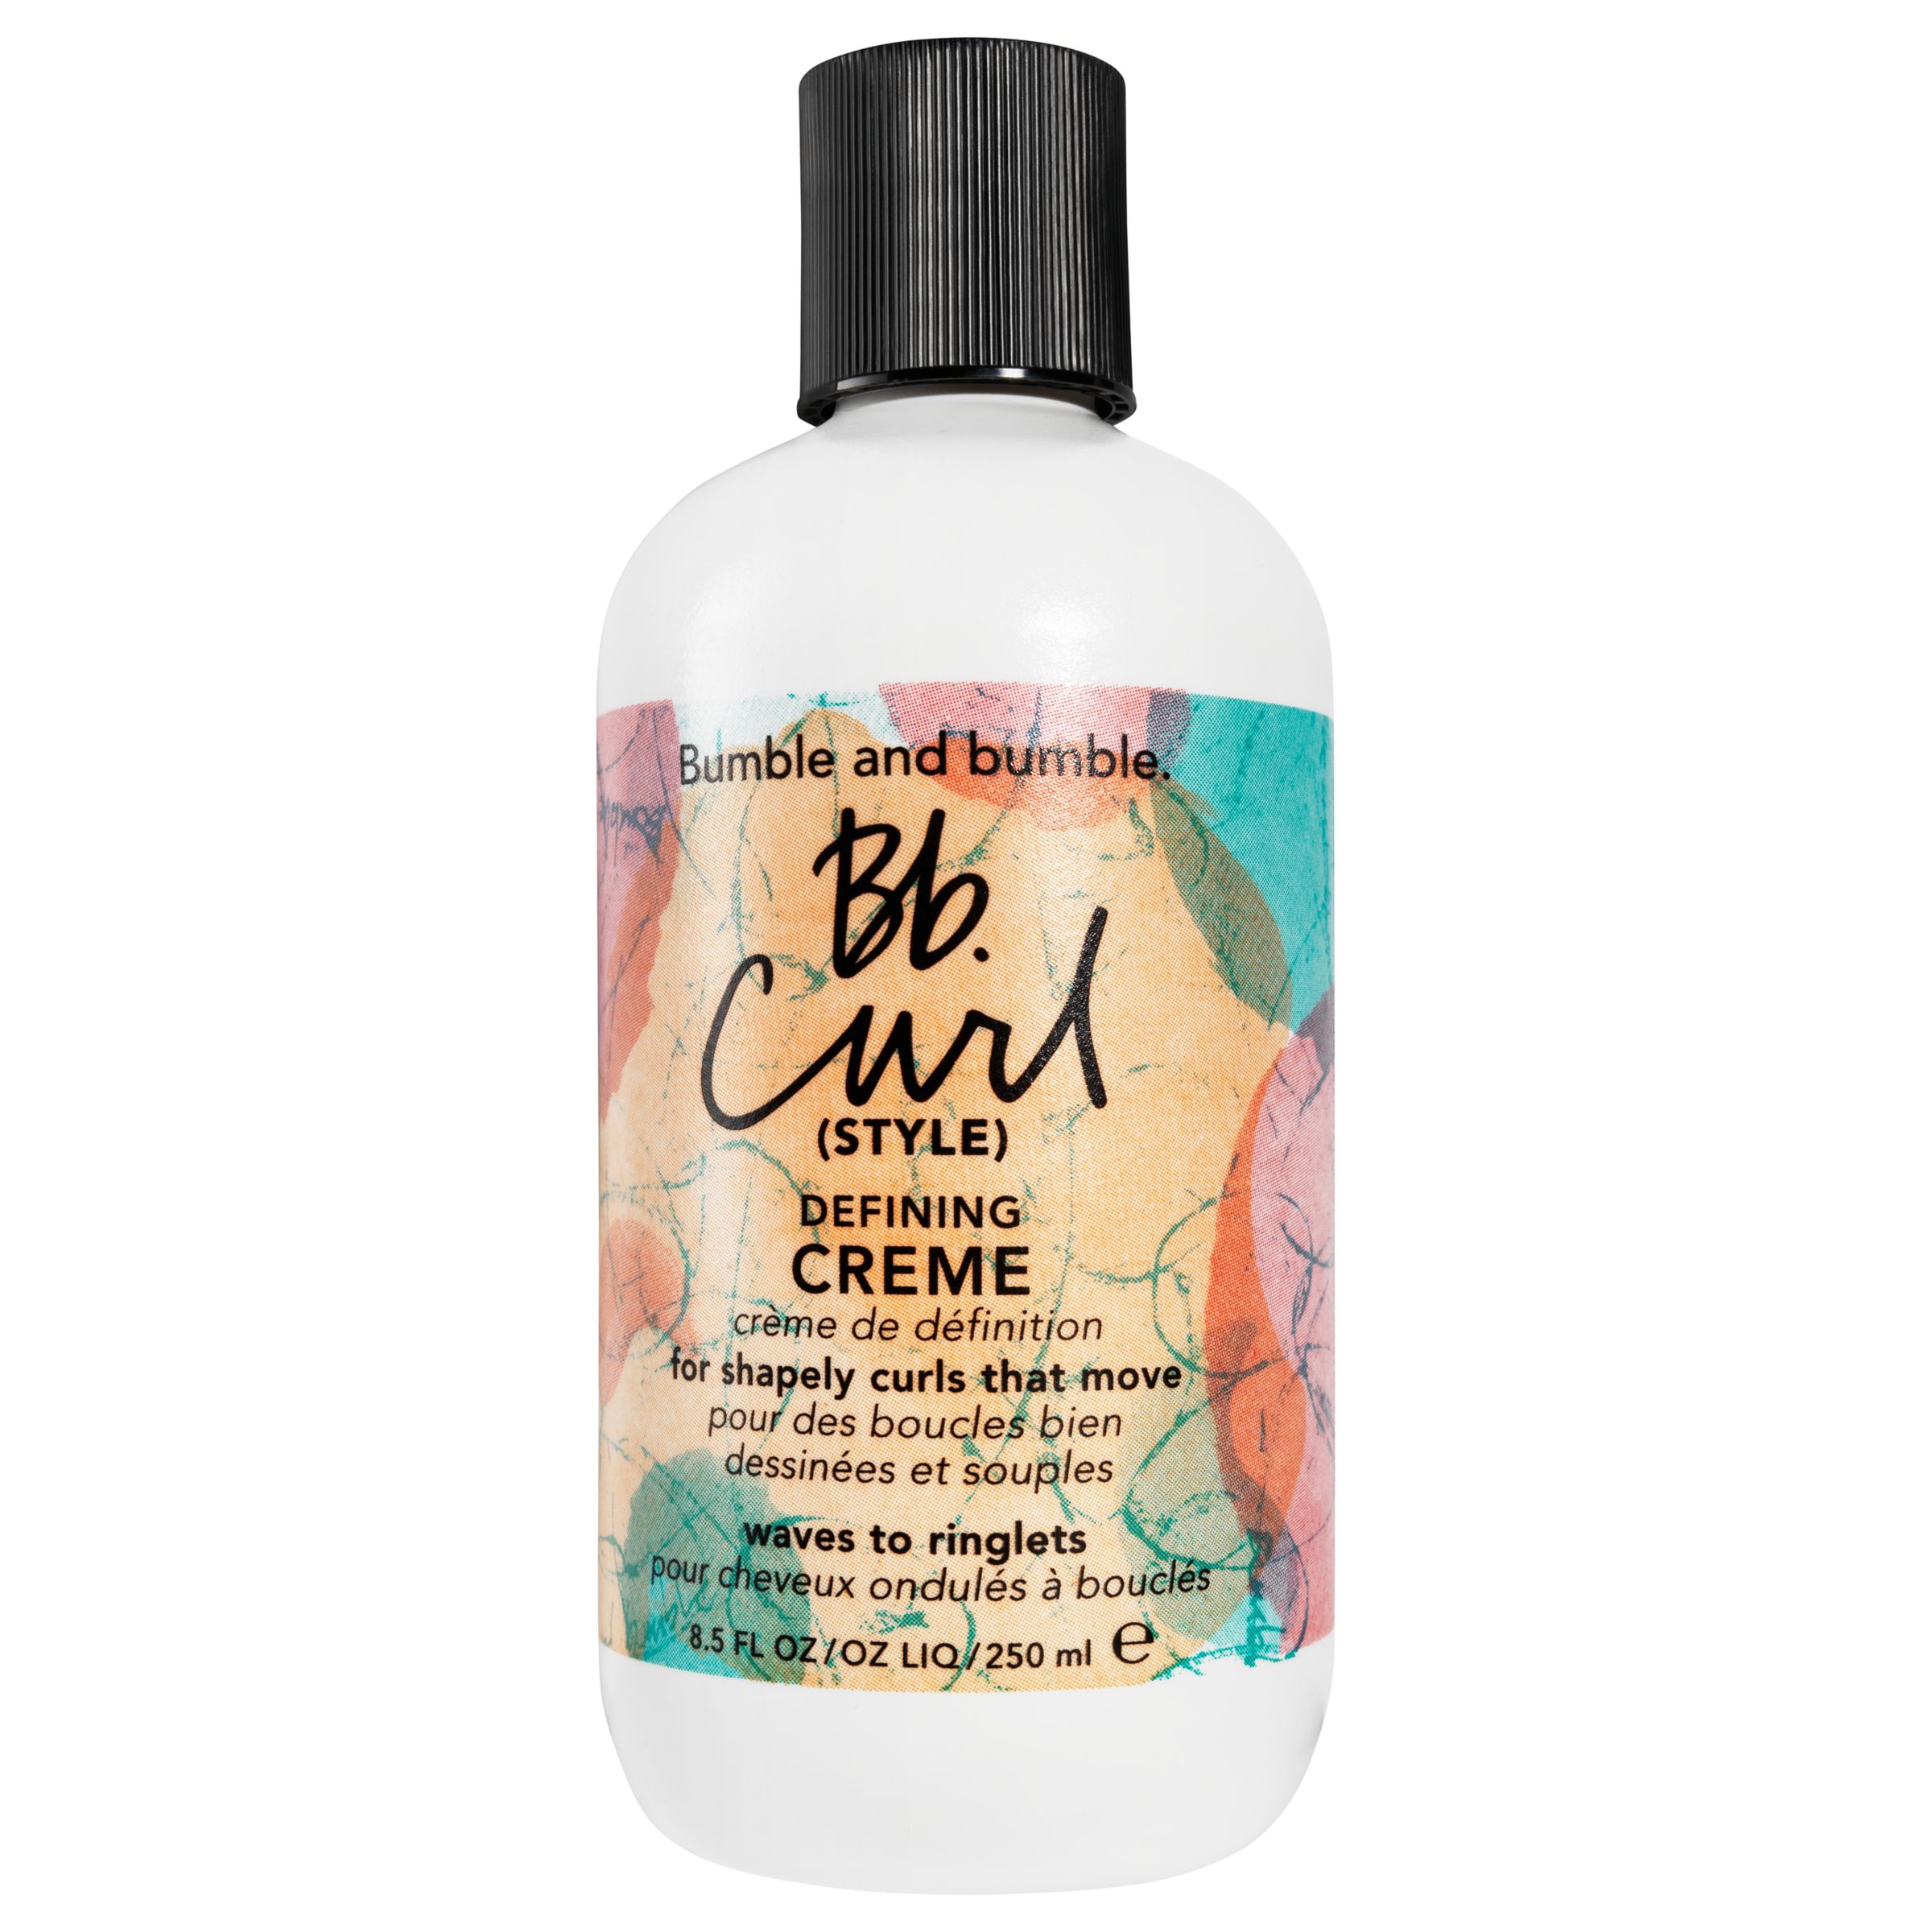 Bumble and bumble Curl Defining Crème, 250ml